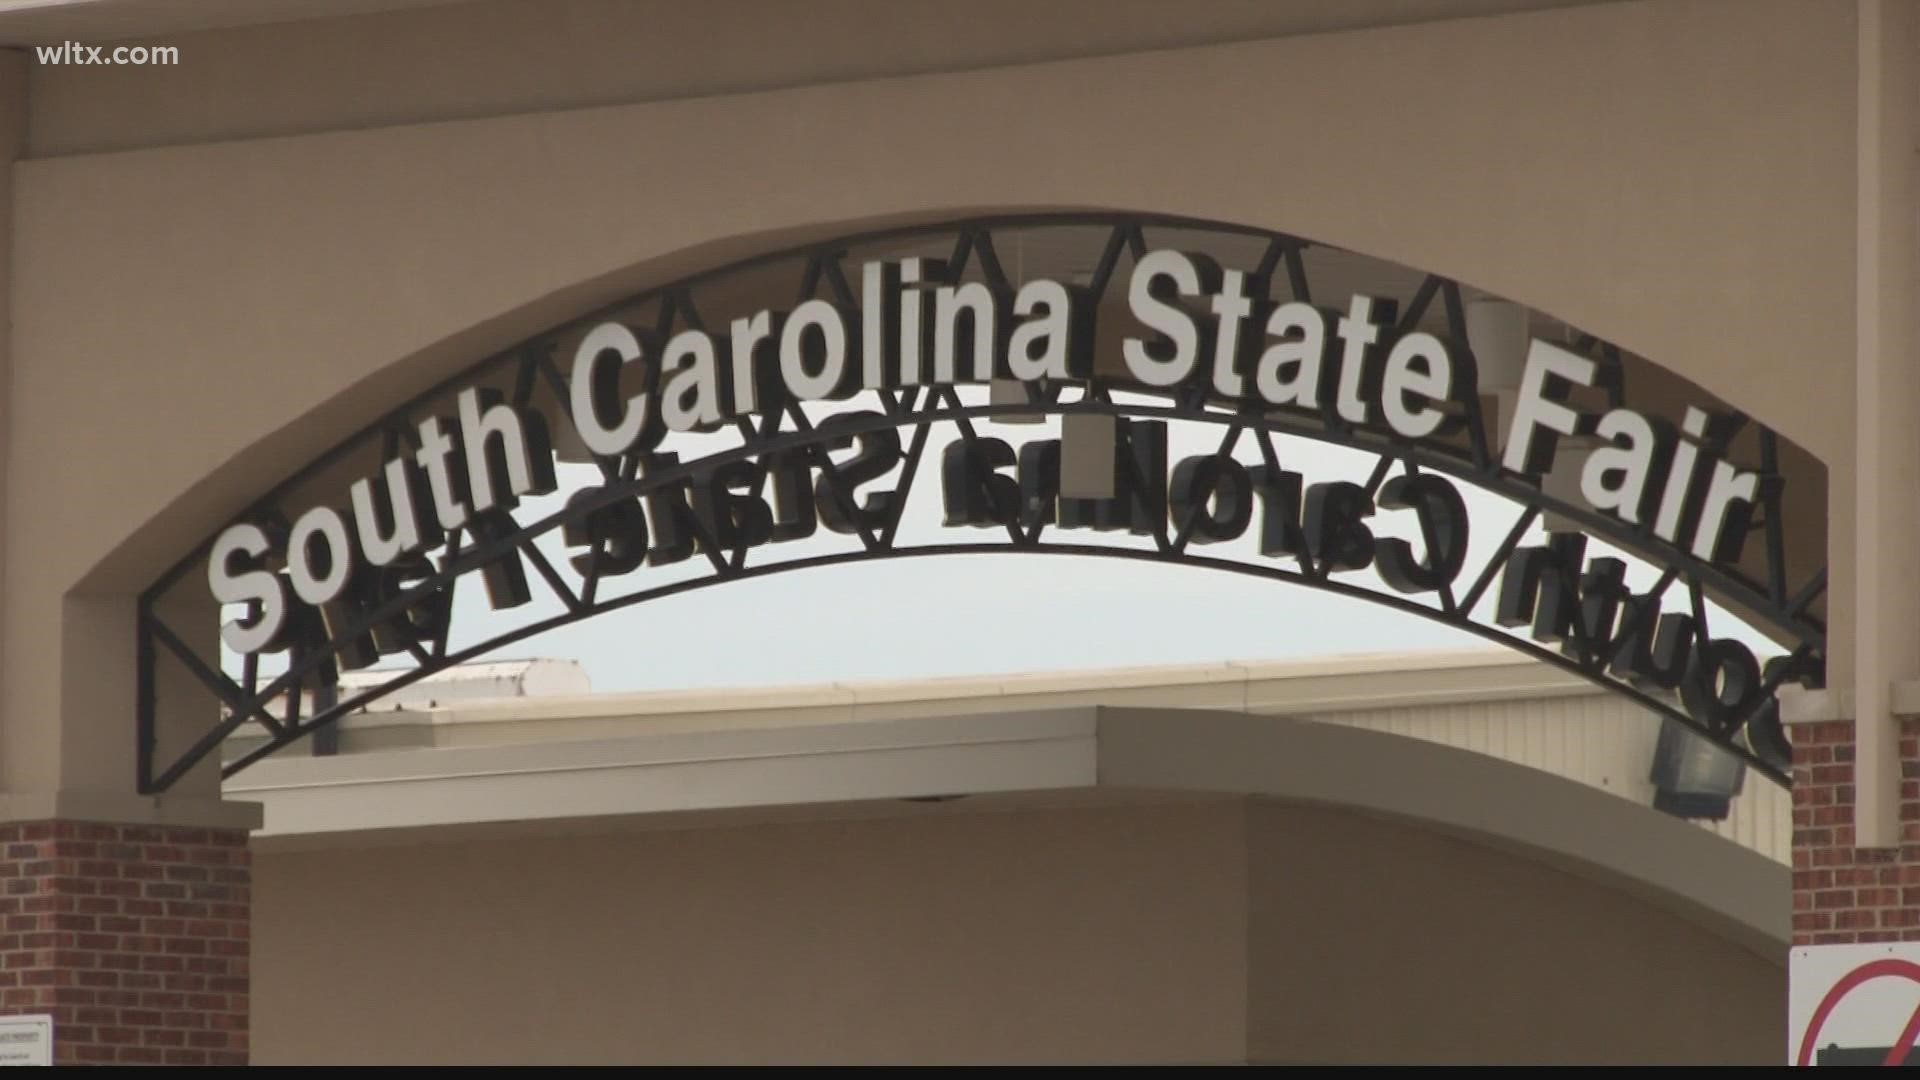 The South Carolina State Fair's general manager, says for the first time, it's reaching out to the public for hiring help.